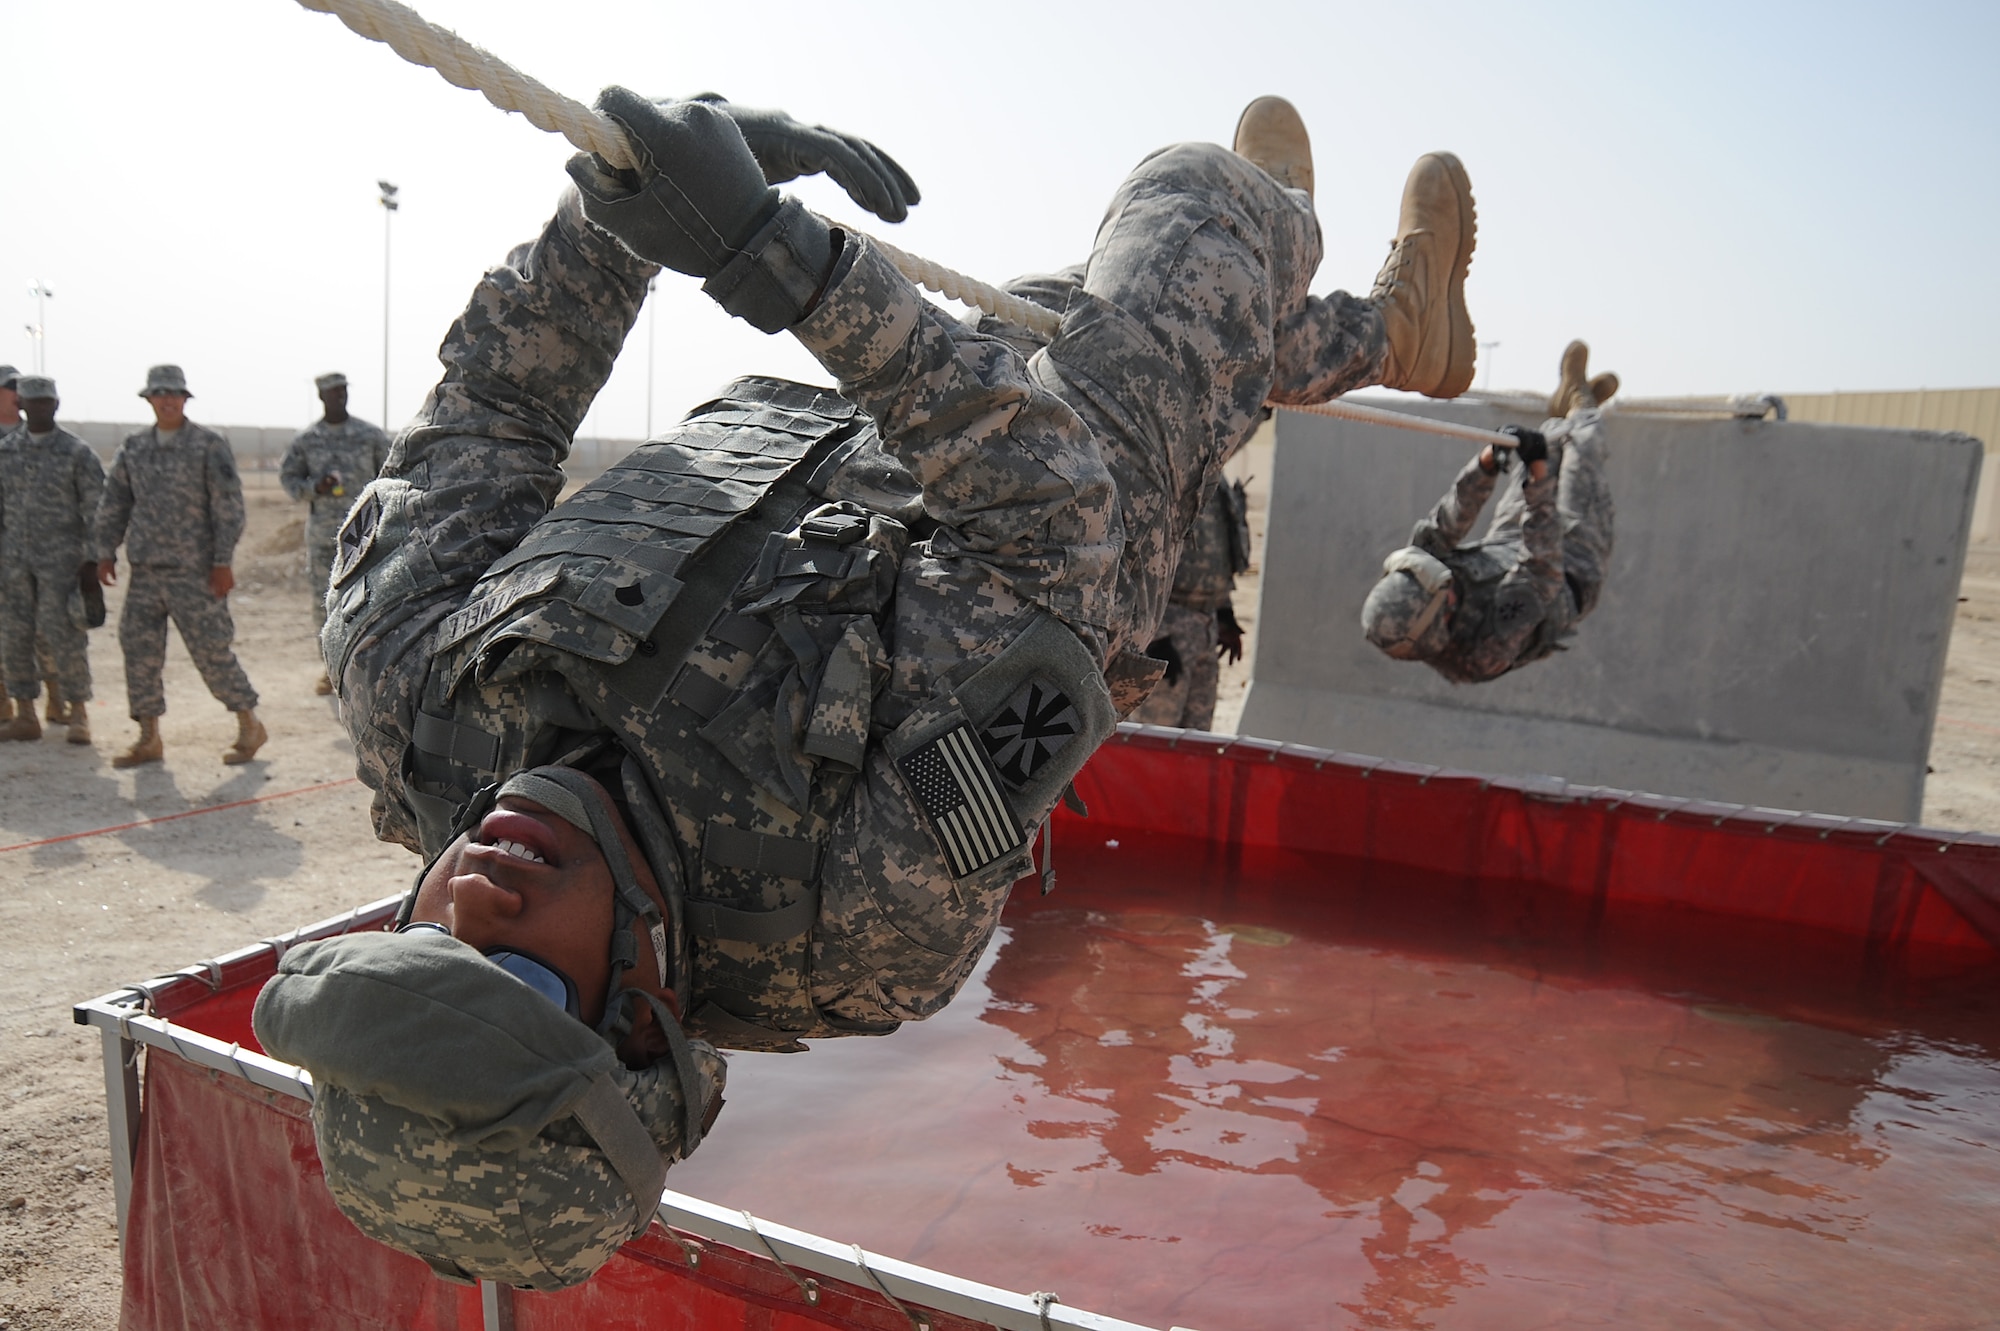 Spc. Alexandre Whitnell, 5-52 Air Defense Artillery Battalion, uses a 15ft rope to cross a water obstacle with his teammates following behind, during a Defender Challenge course, April 25 at an undisclosed location in Southwest Asia. The competition was close with his team finishing second place, just one second behind the winning team. Specialist Whitnell is deployed out of Fort Bliss, Texas and hails from Chicago, Ill.  (U.S. Air Force photo by Senior Airman Brian J. Ellis) (Released)